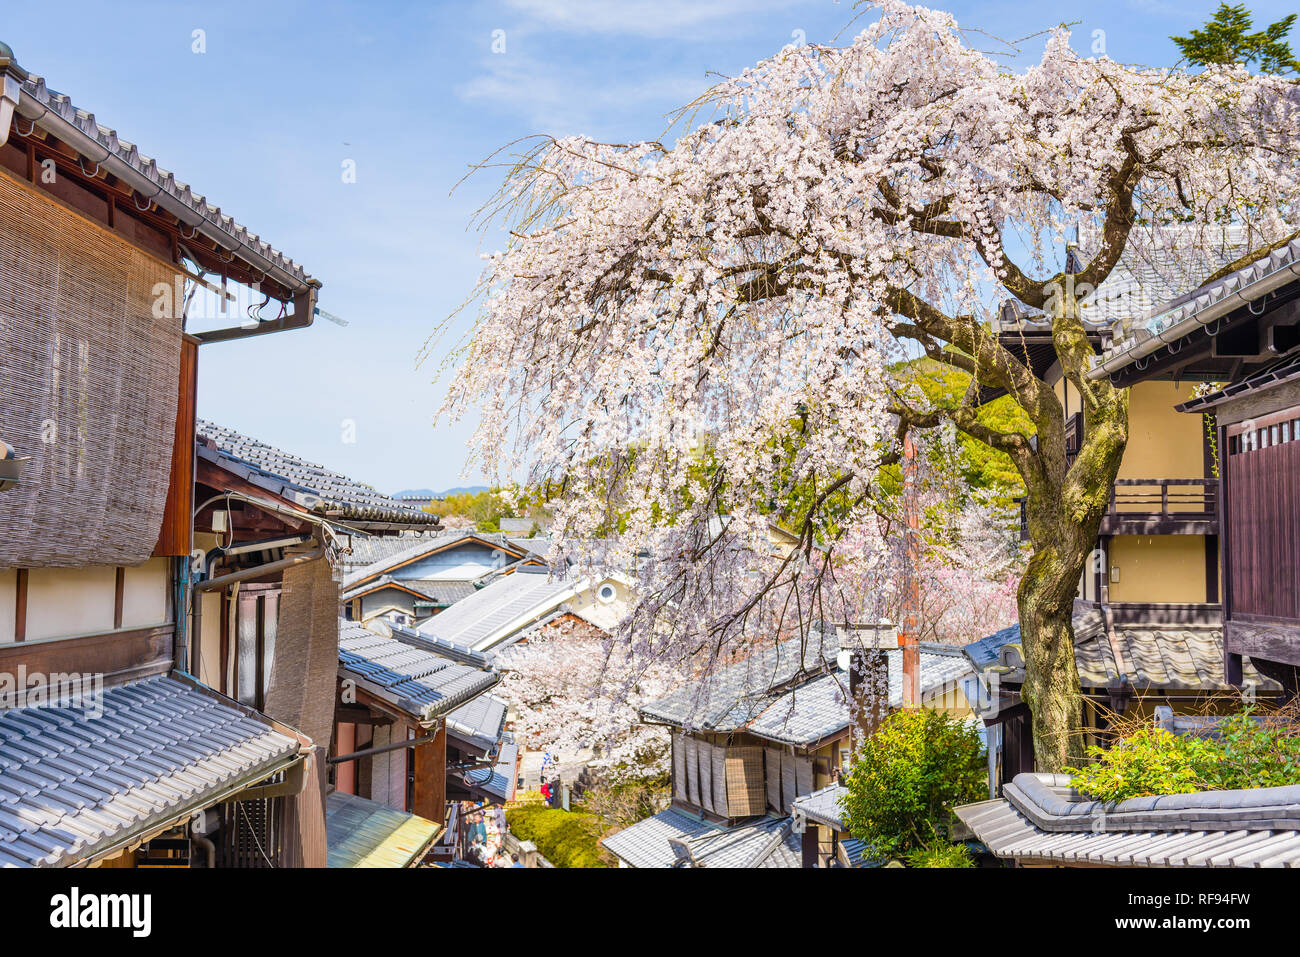 Kyoto, Japan in the Higashiyama district with cherry blossoms the springtime. Stock Photo